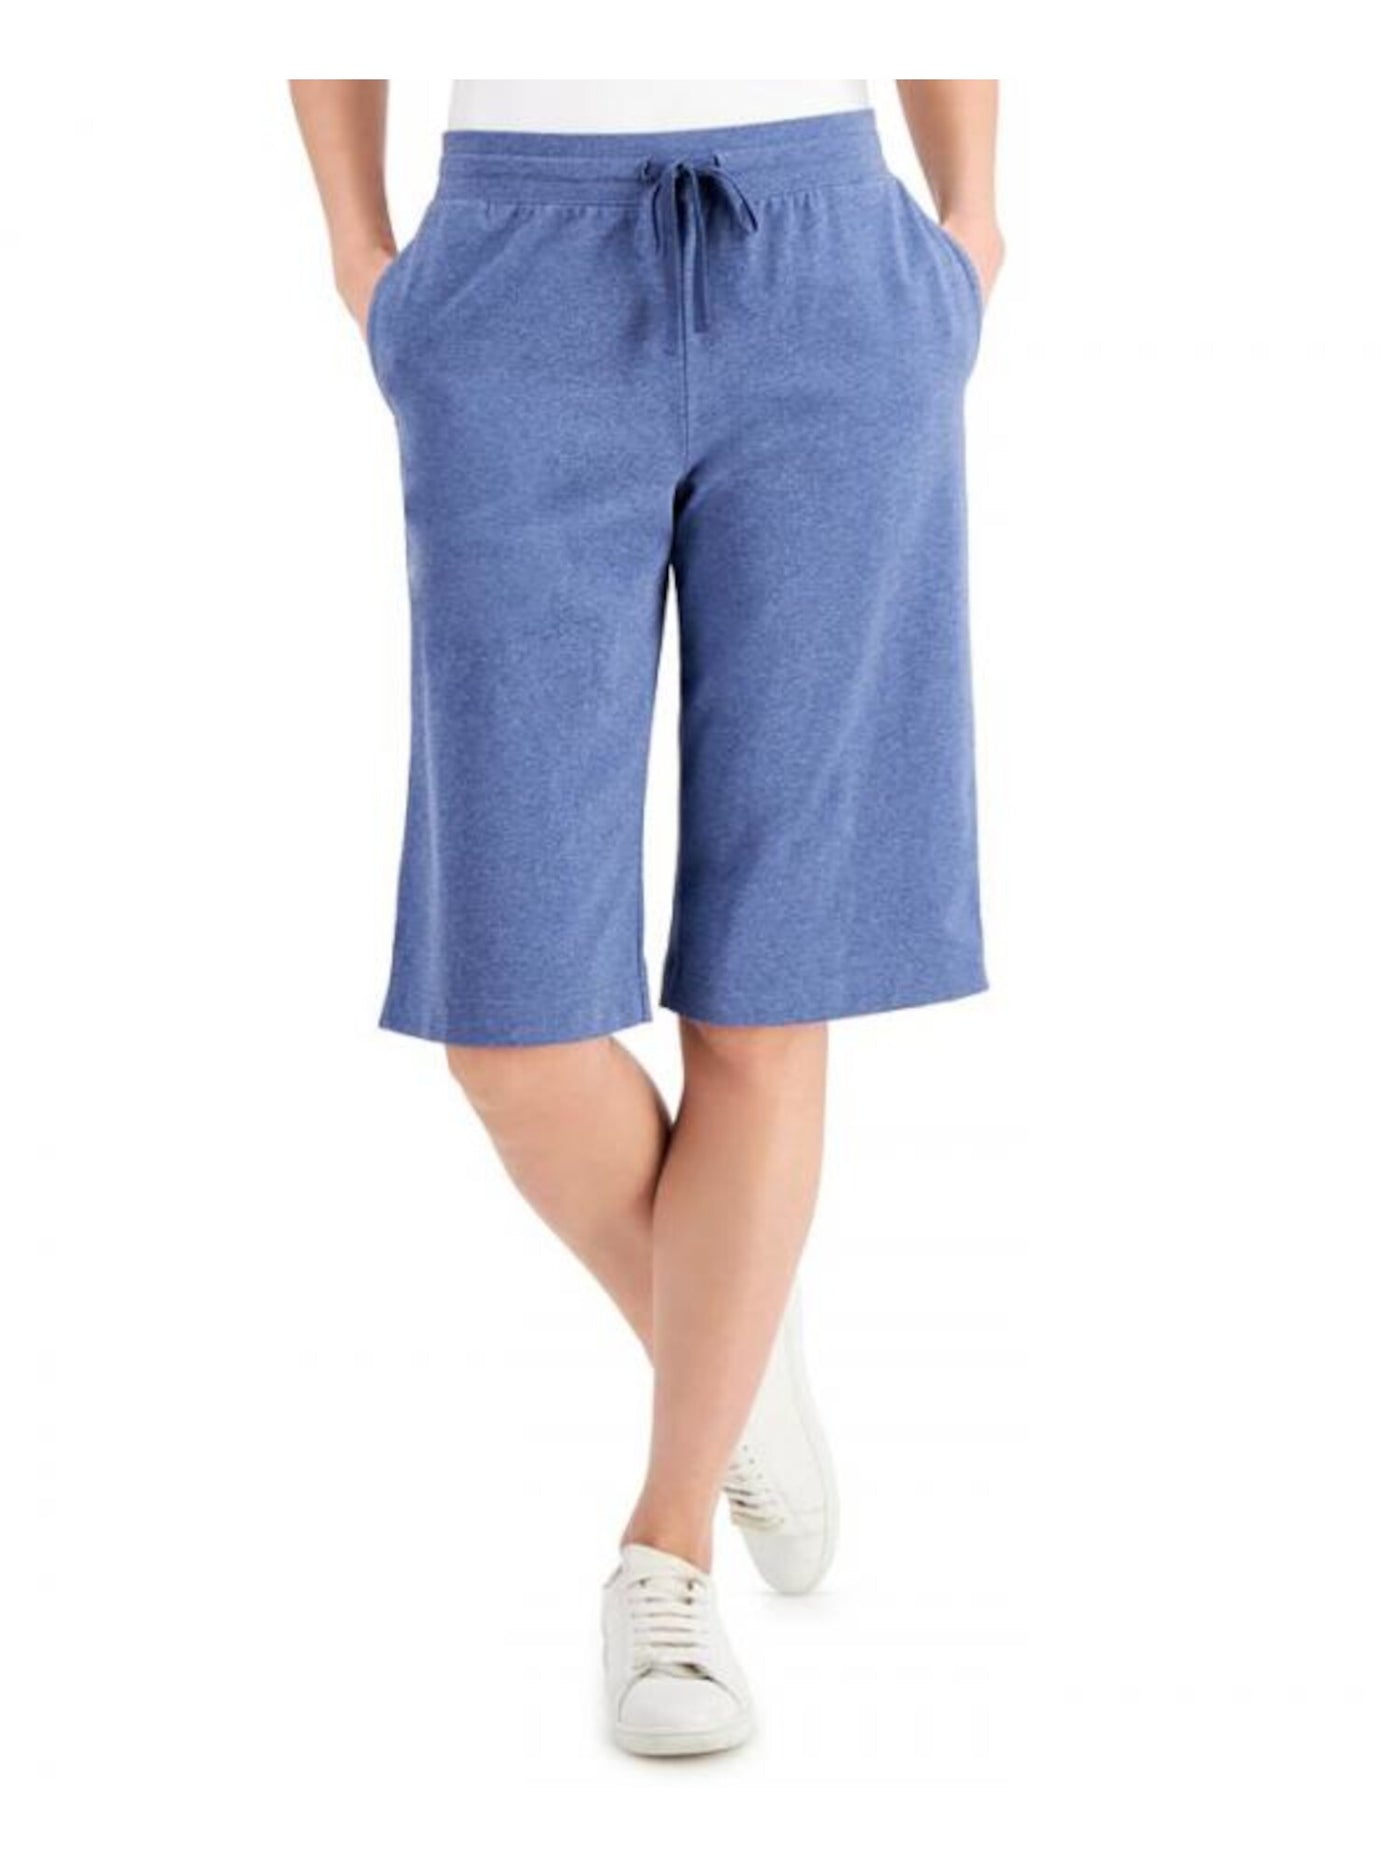 KAREN SCOTT SPORT Womens Blue Tie Pocketed Mid Rise Relaxed Fit Skimmer Heather Shorts Petites PP